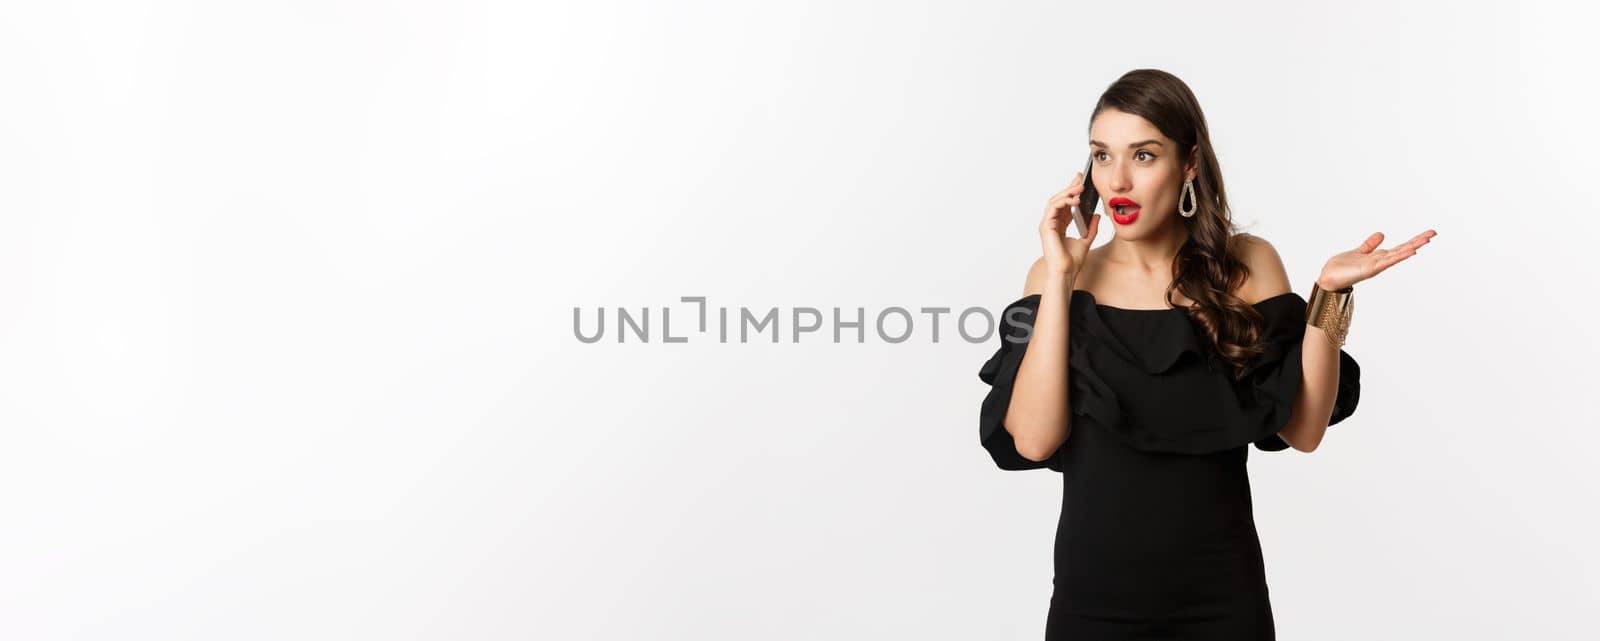 Attractive glamour woman in black dress talking on mobile phone, having conversation and looking surprised, standing over white background.